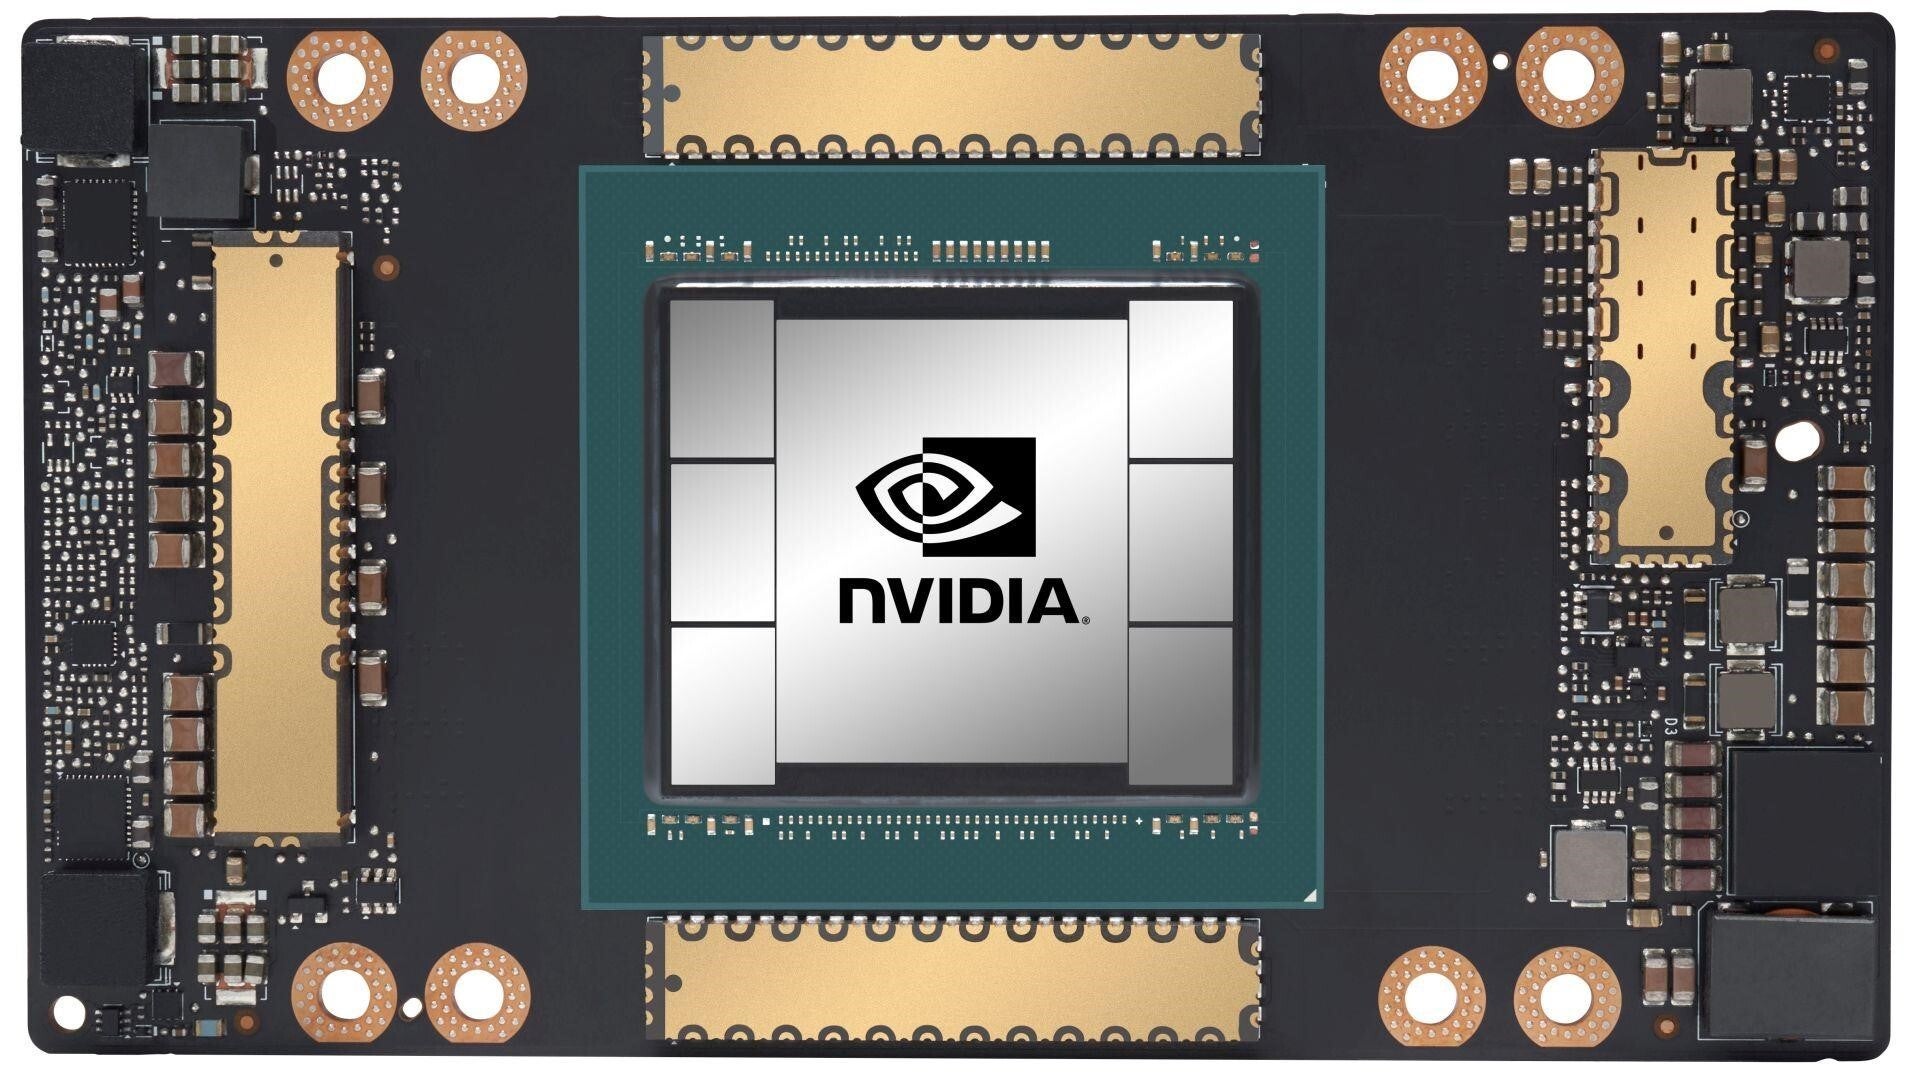 Nvidia is reportedly planning to sell technology to Huawei - Nvidia and Qualcomm could be hurt by U.S. plan to block more exports to Huawei